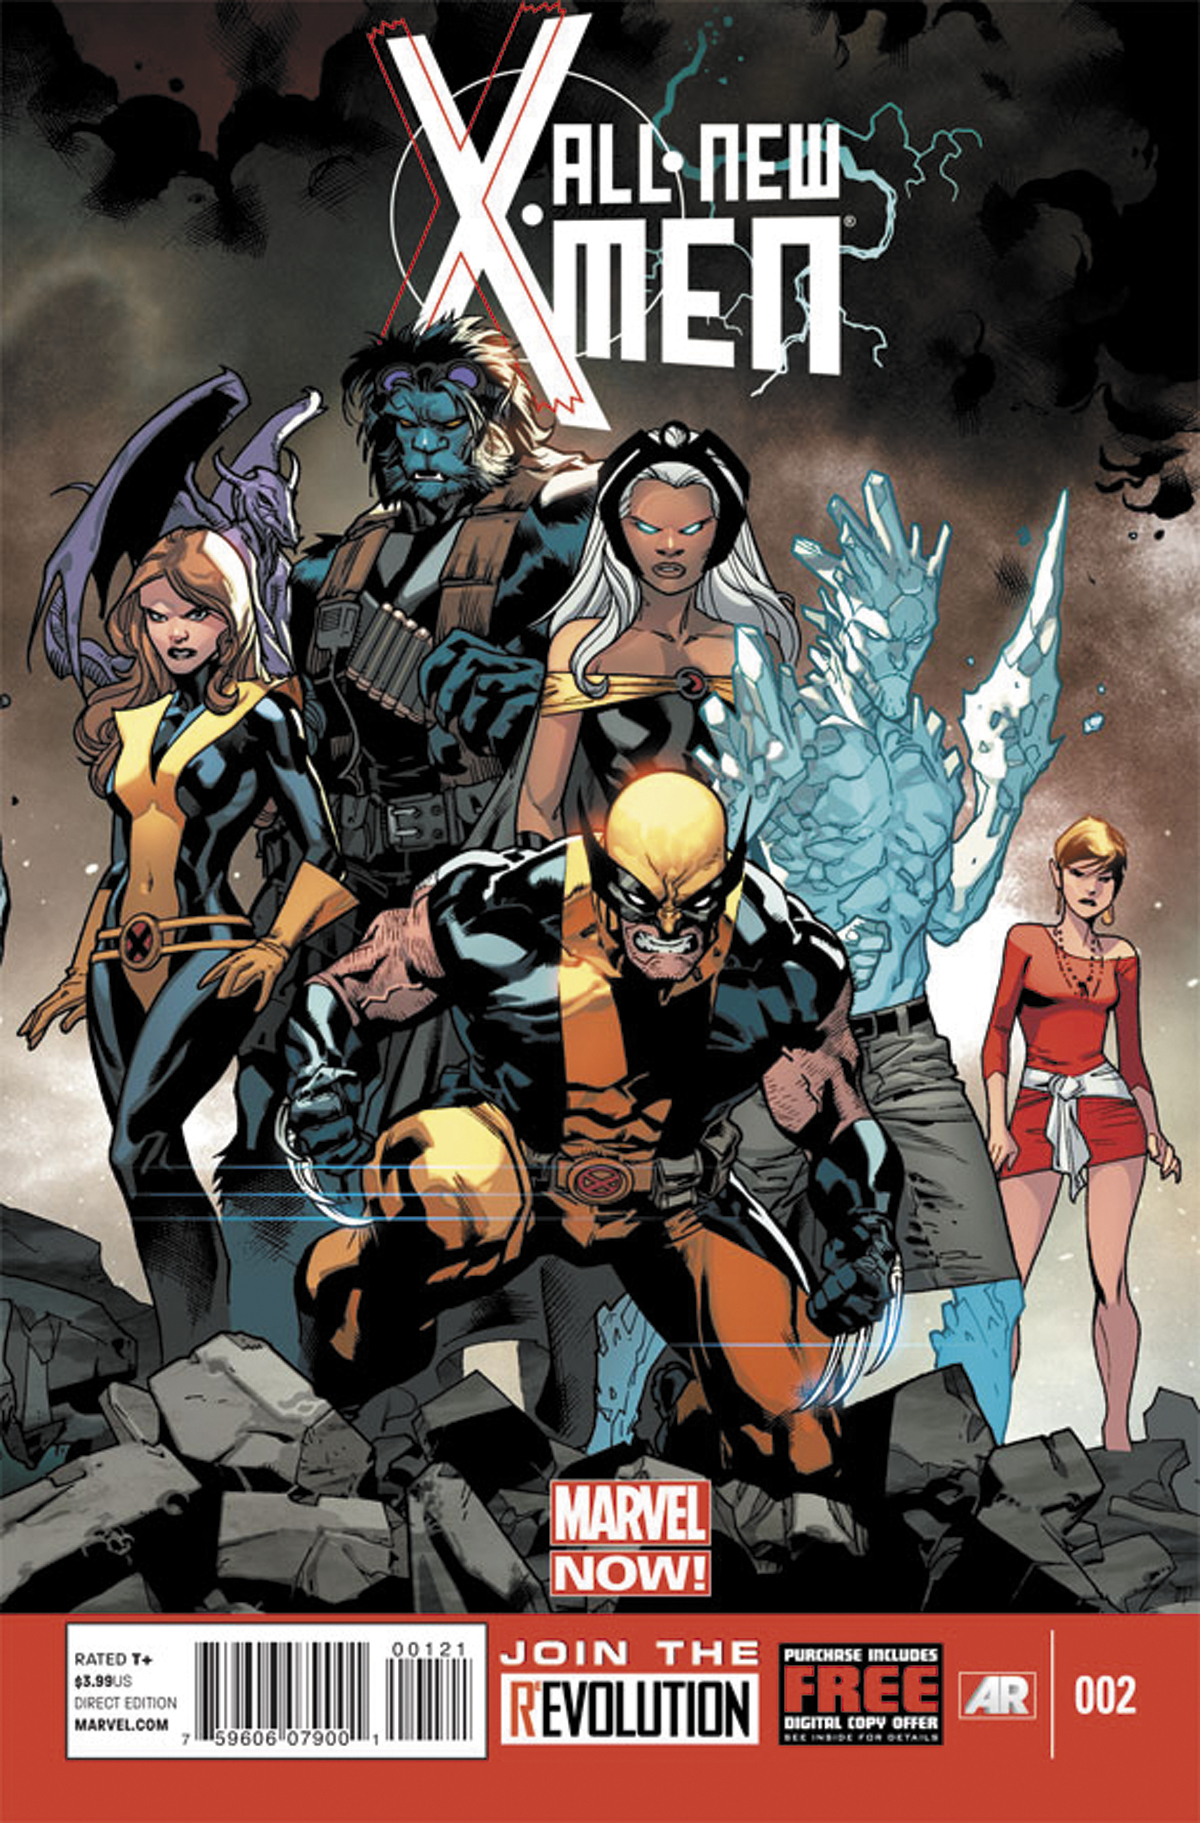 ALL NEW X-MEN #2 NOW